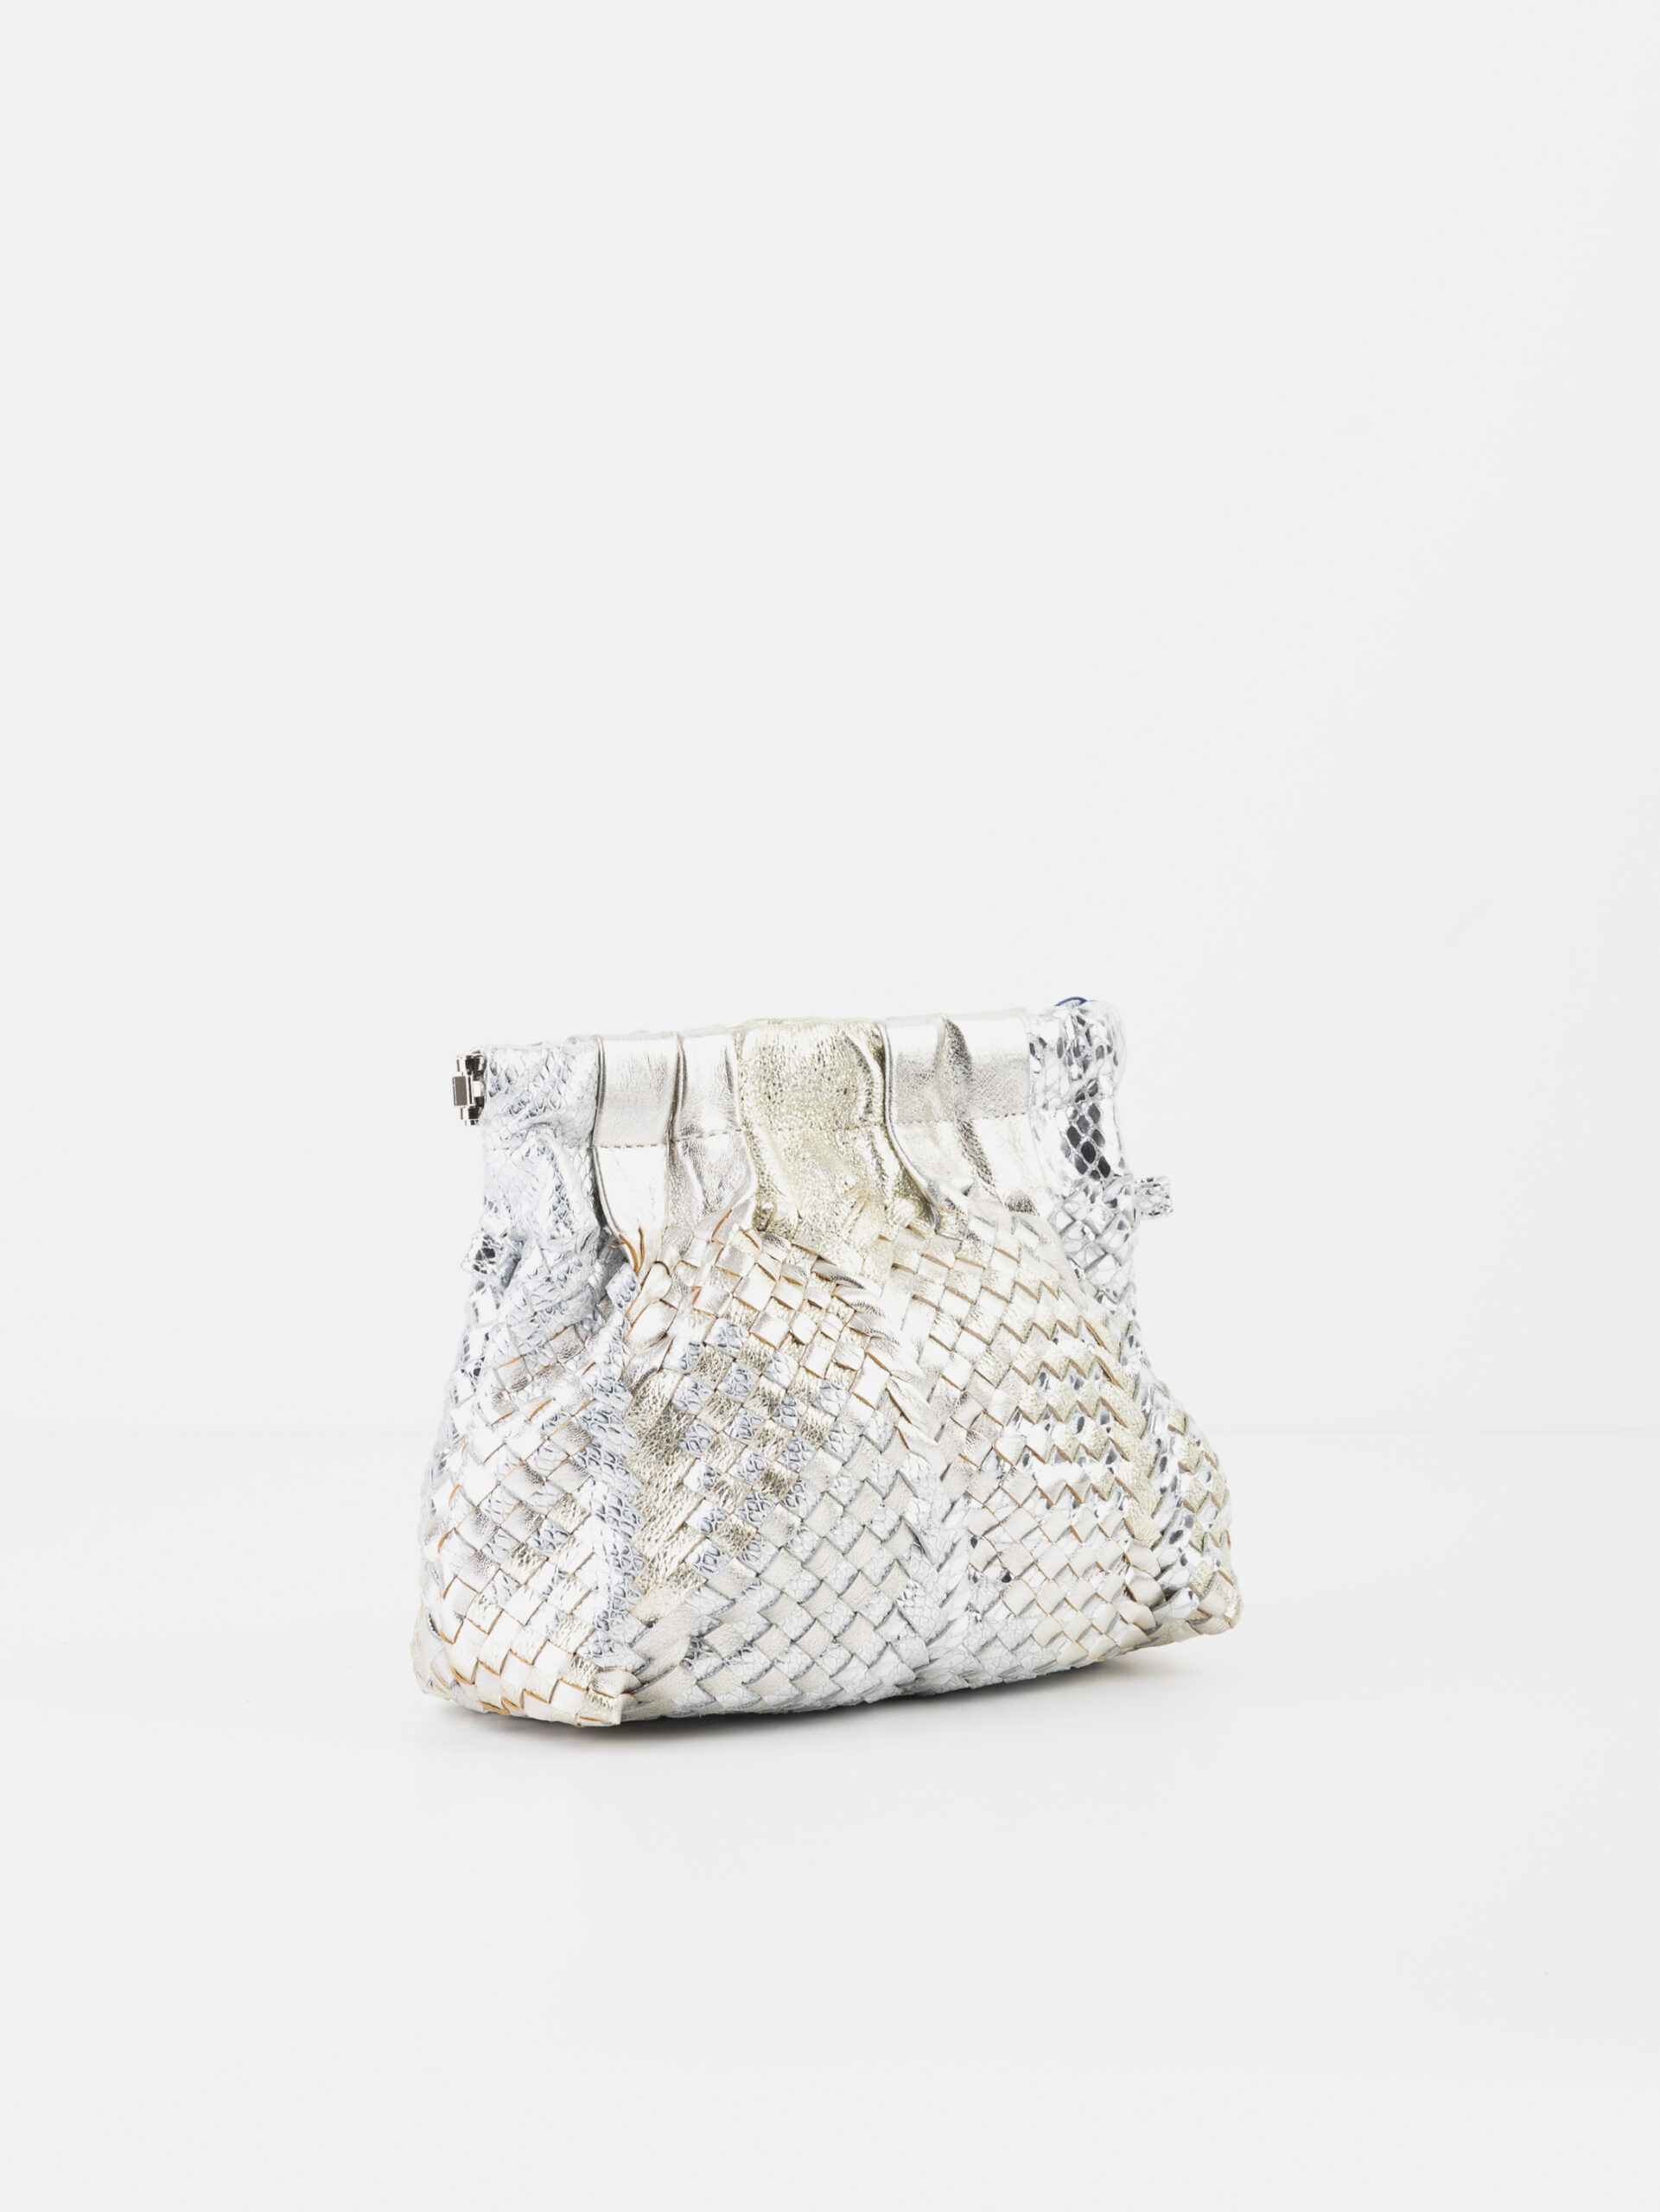 baby-lissa-mini-clutch-leather-silver-mix-weaved-claramonte-bag-matchboxathens